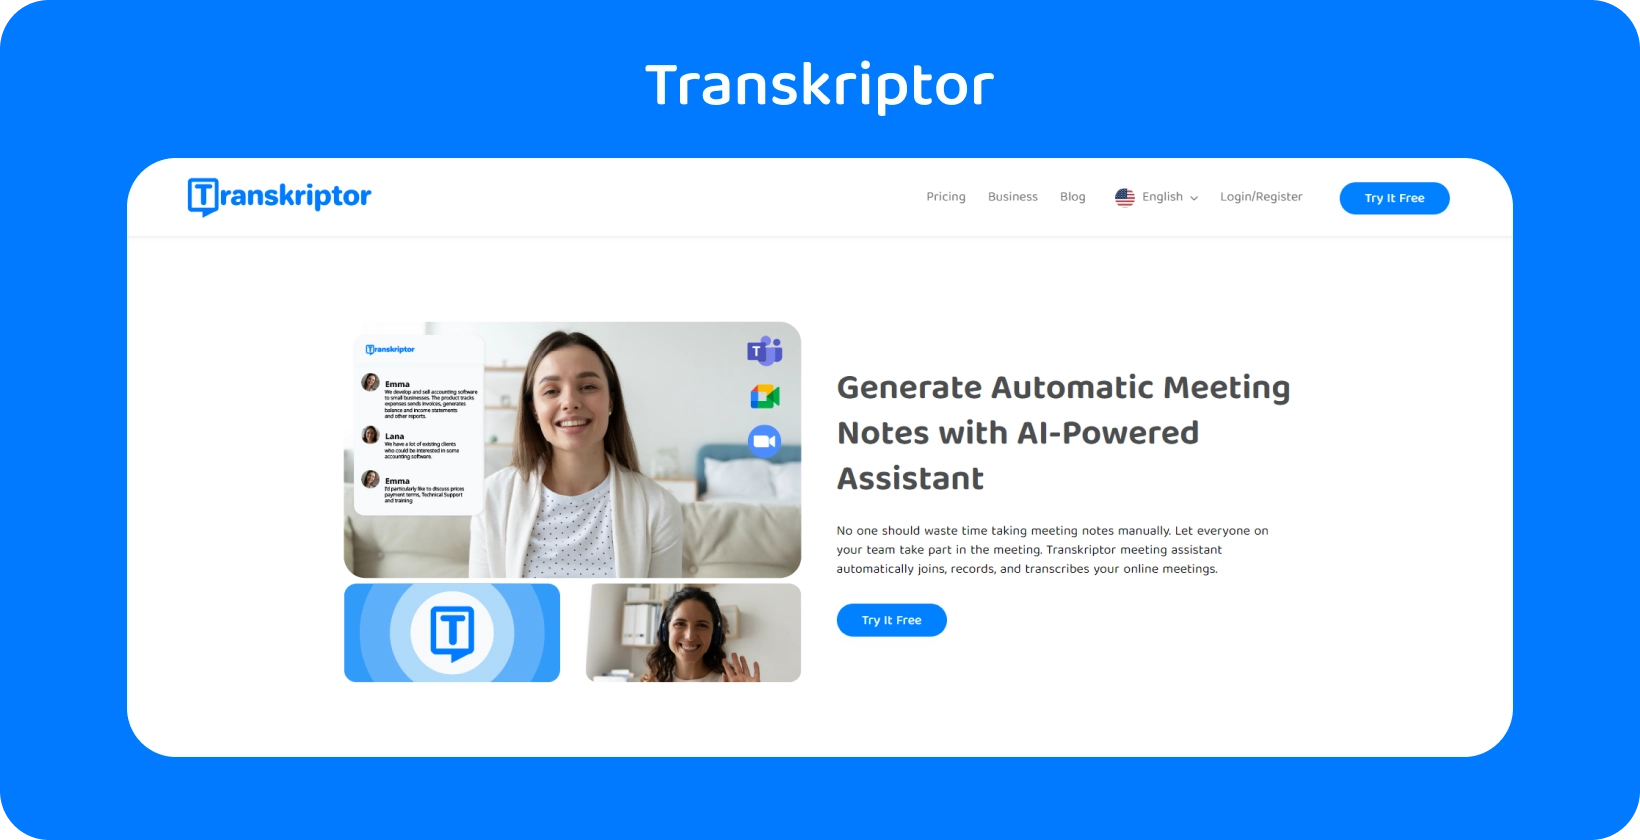 Transkriptor landing page displaying audio to text, representing modern text conversion tools.